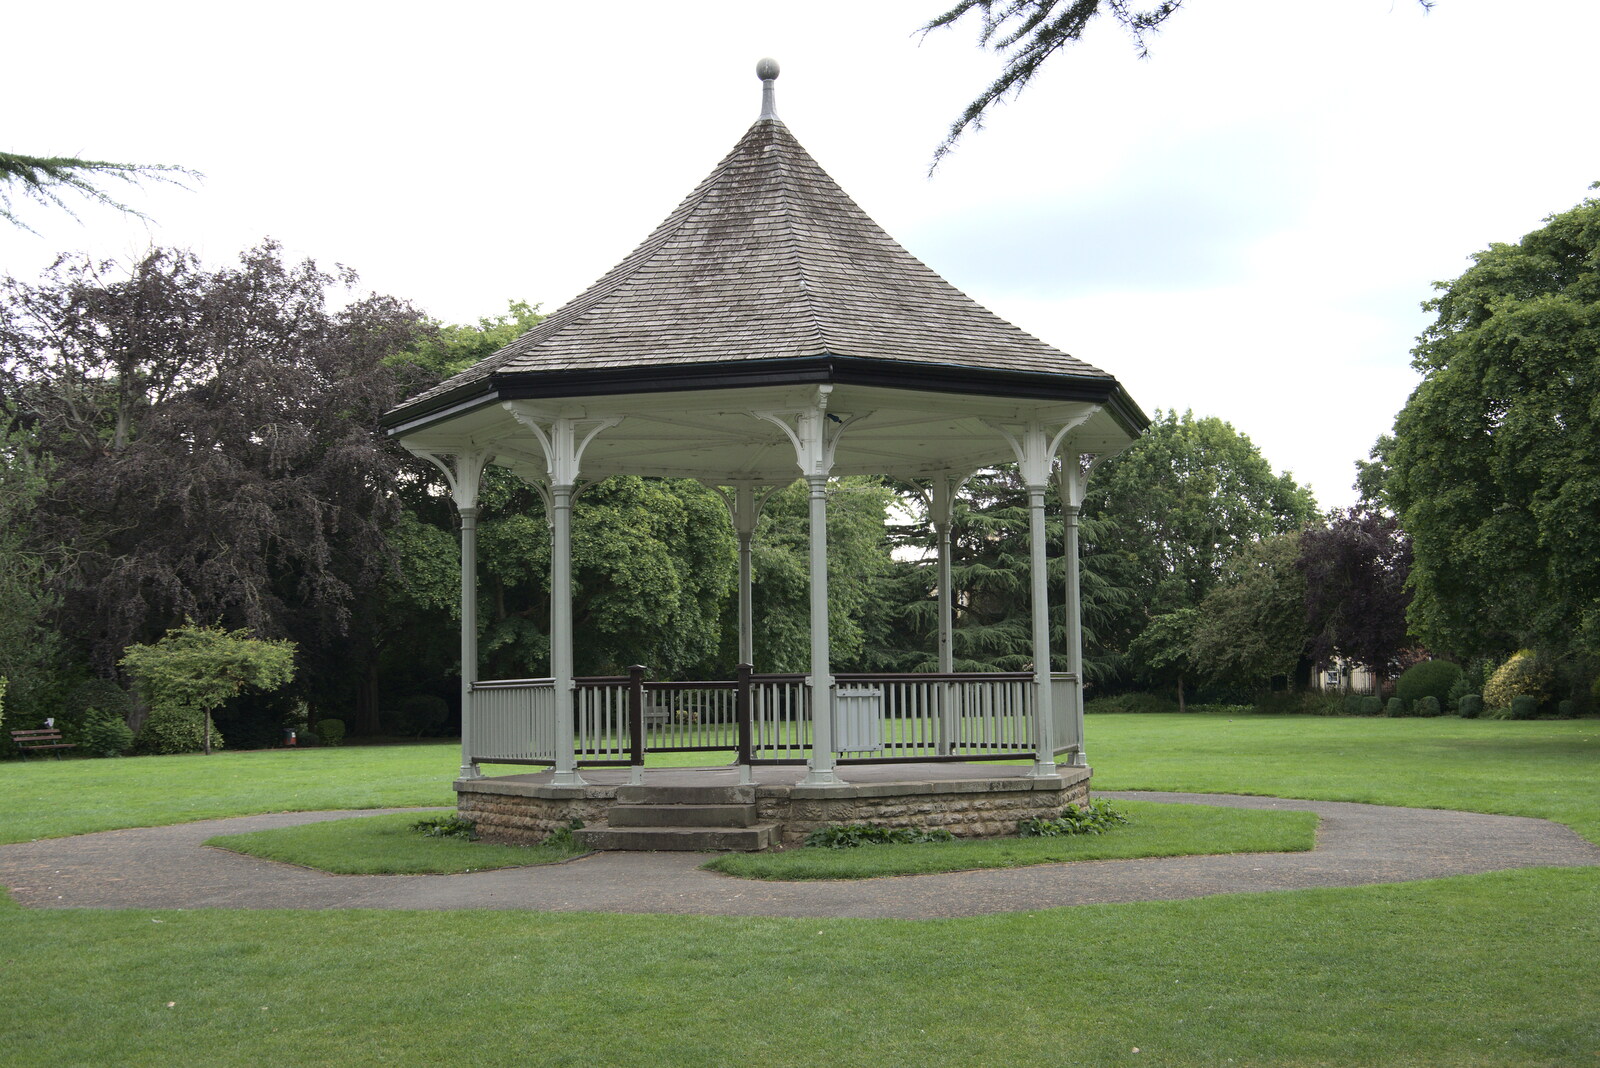 An empty band stand from Pork Pies and Dockside Dereliction, Melton Mowbray and Liverpool - 7th August 2021